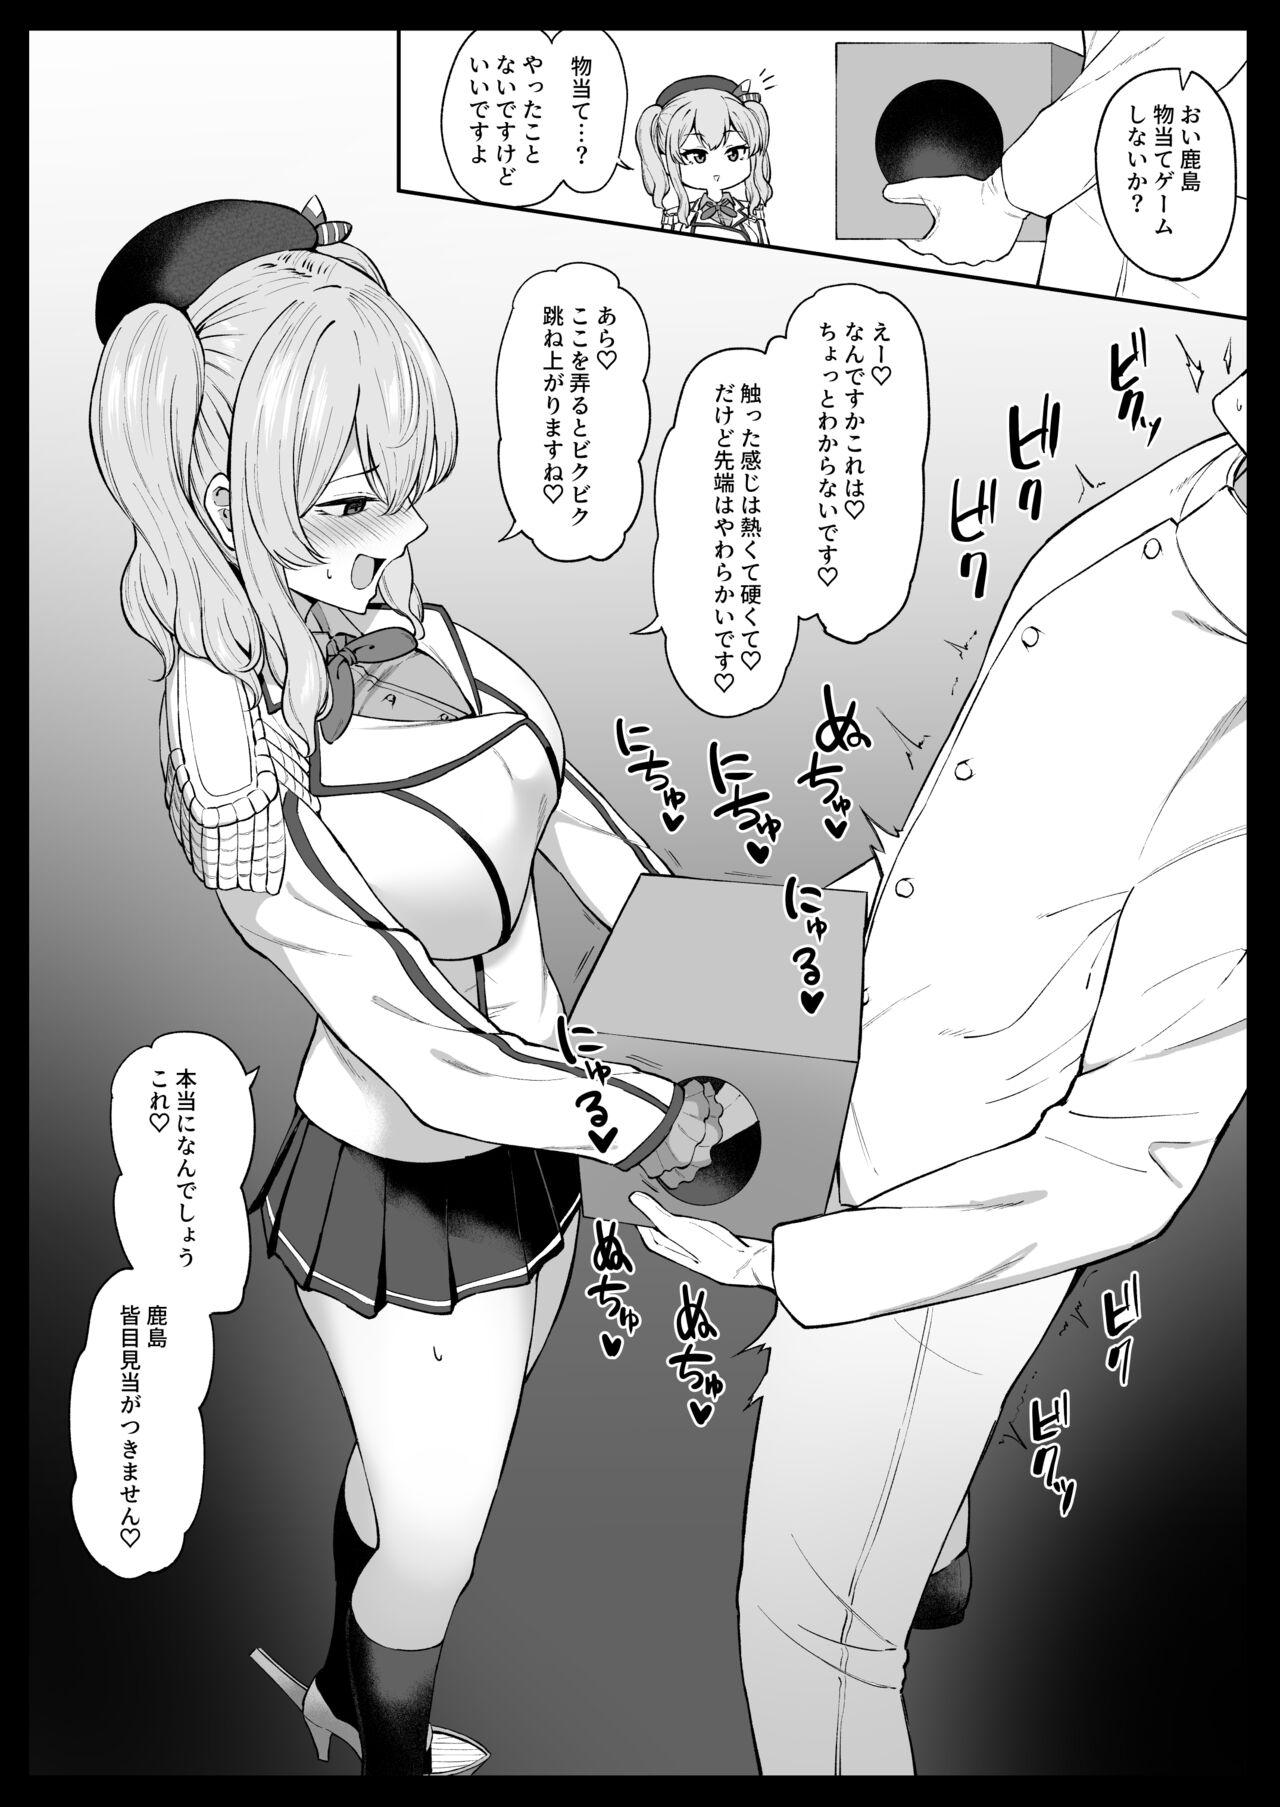 Rubia 鹿島 - Kantai collection Homemade - Page 2